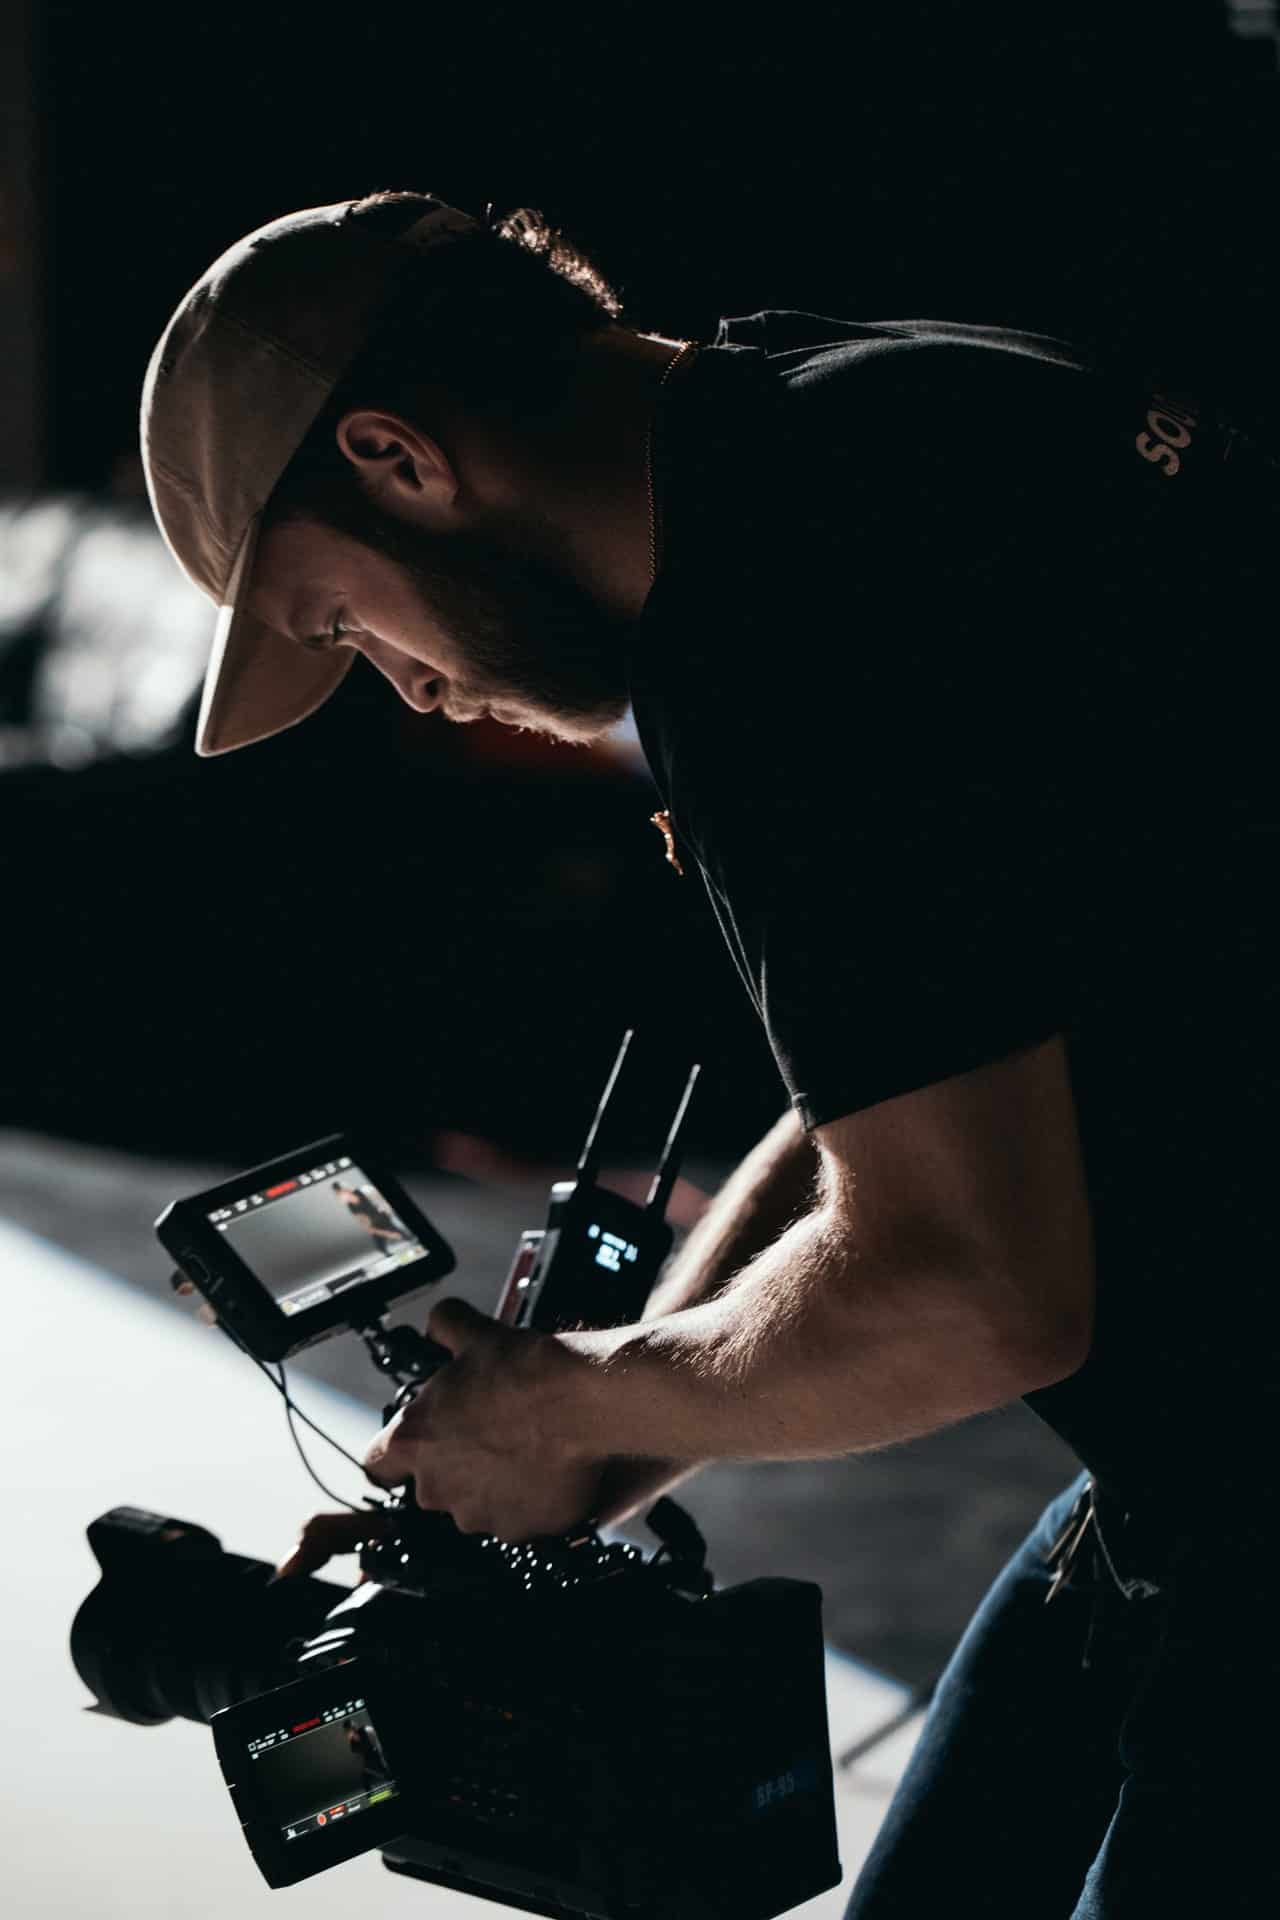 How To Get Started in Videography